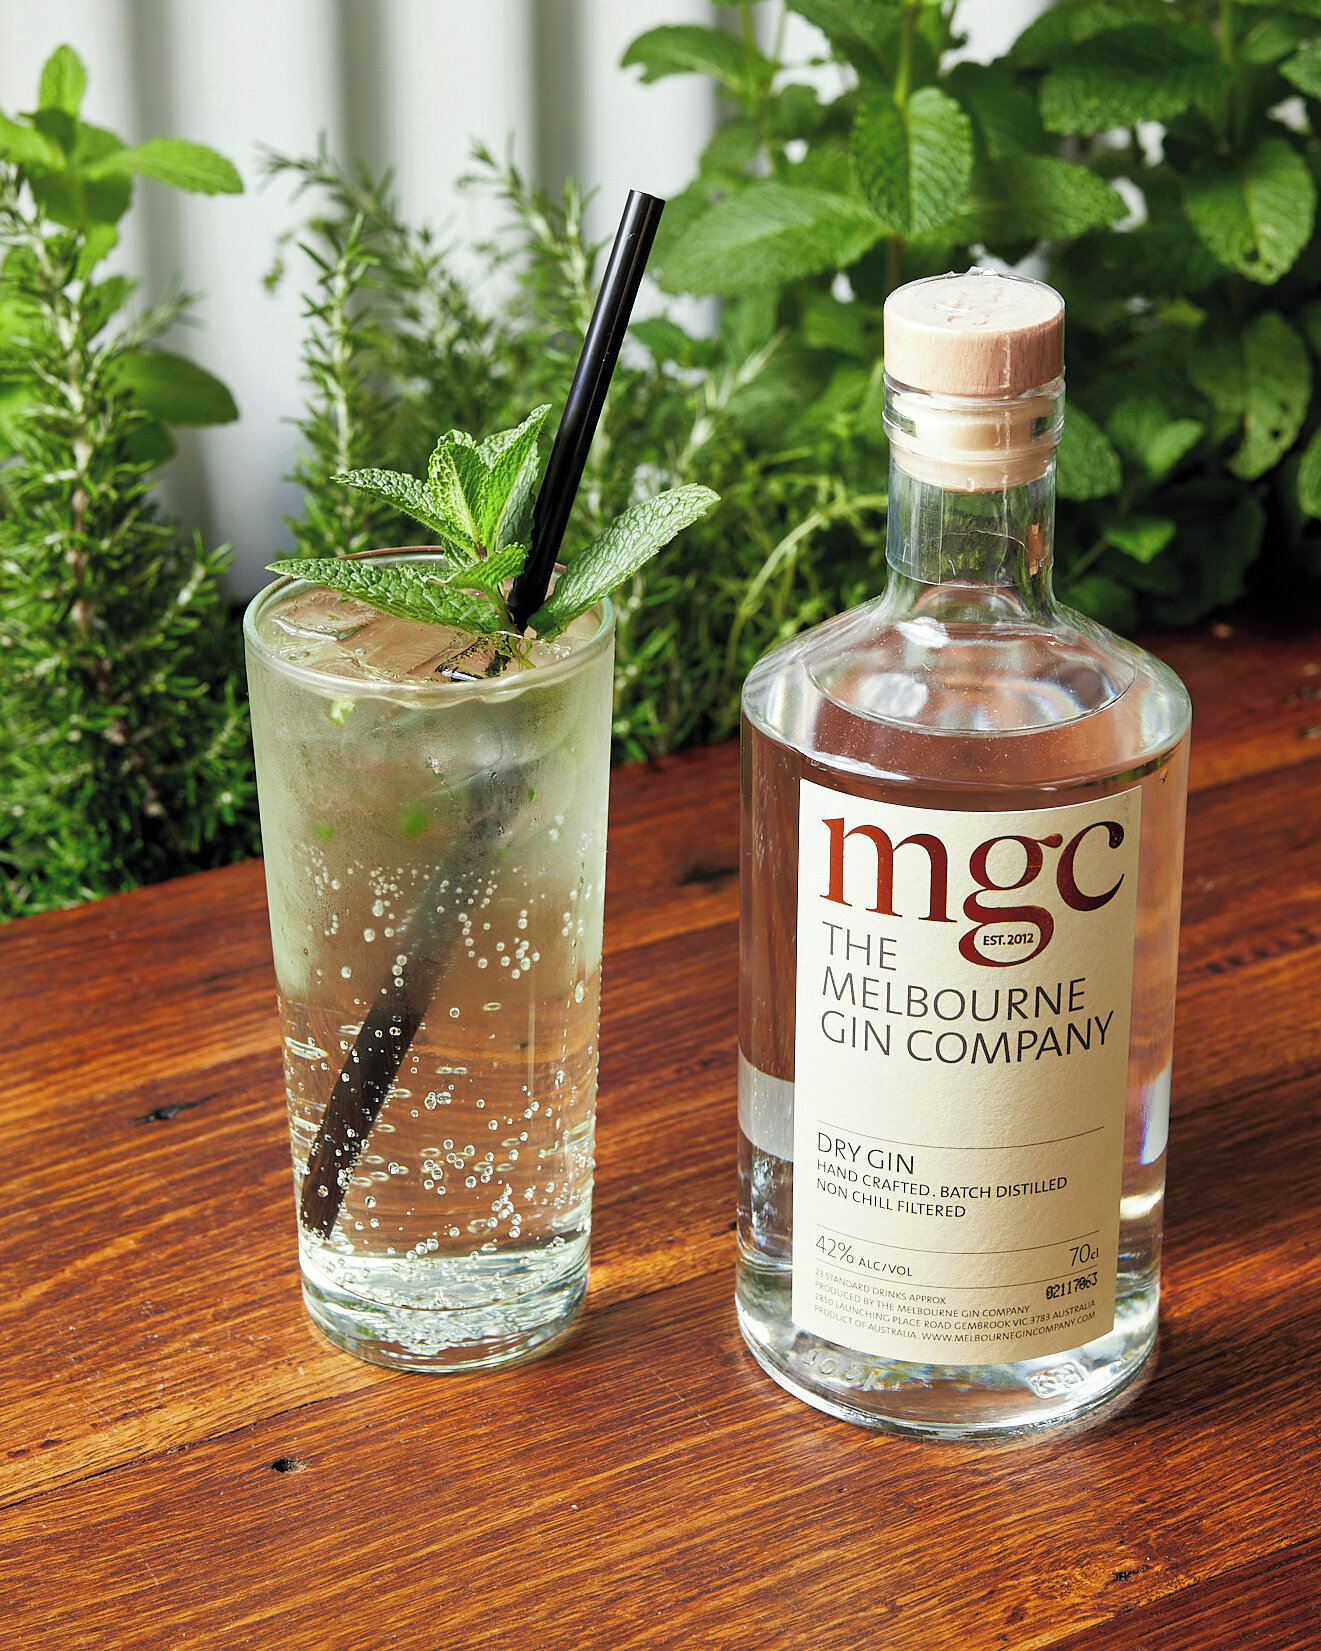 There's nothing more Melbourne than a classic Gin &amp; Tonic, especially from our friends at @melbourneginco ✨